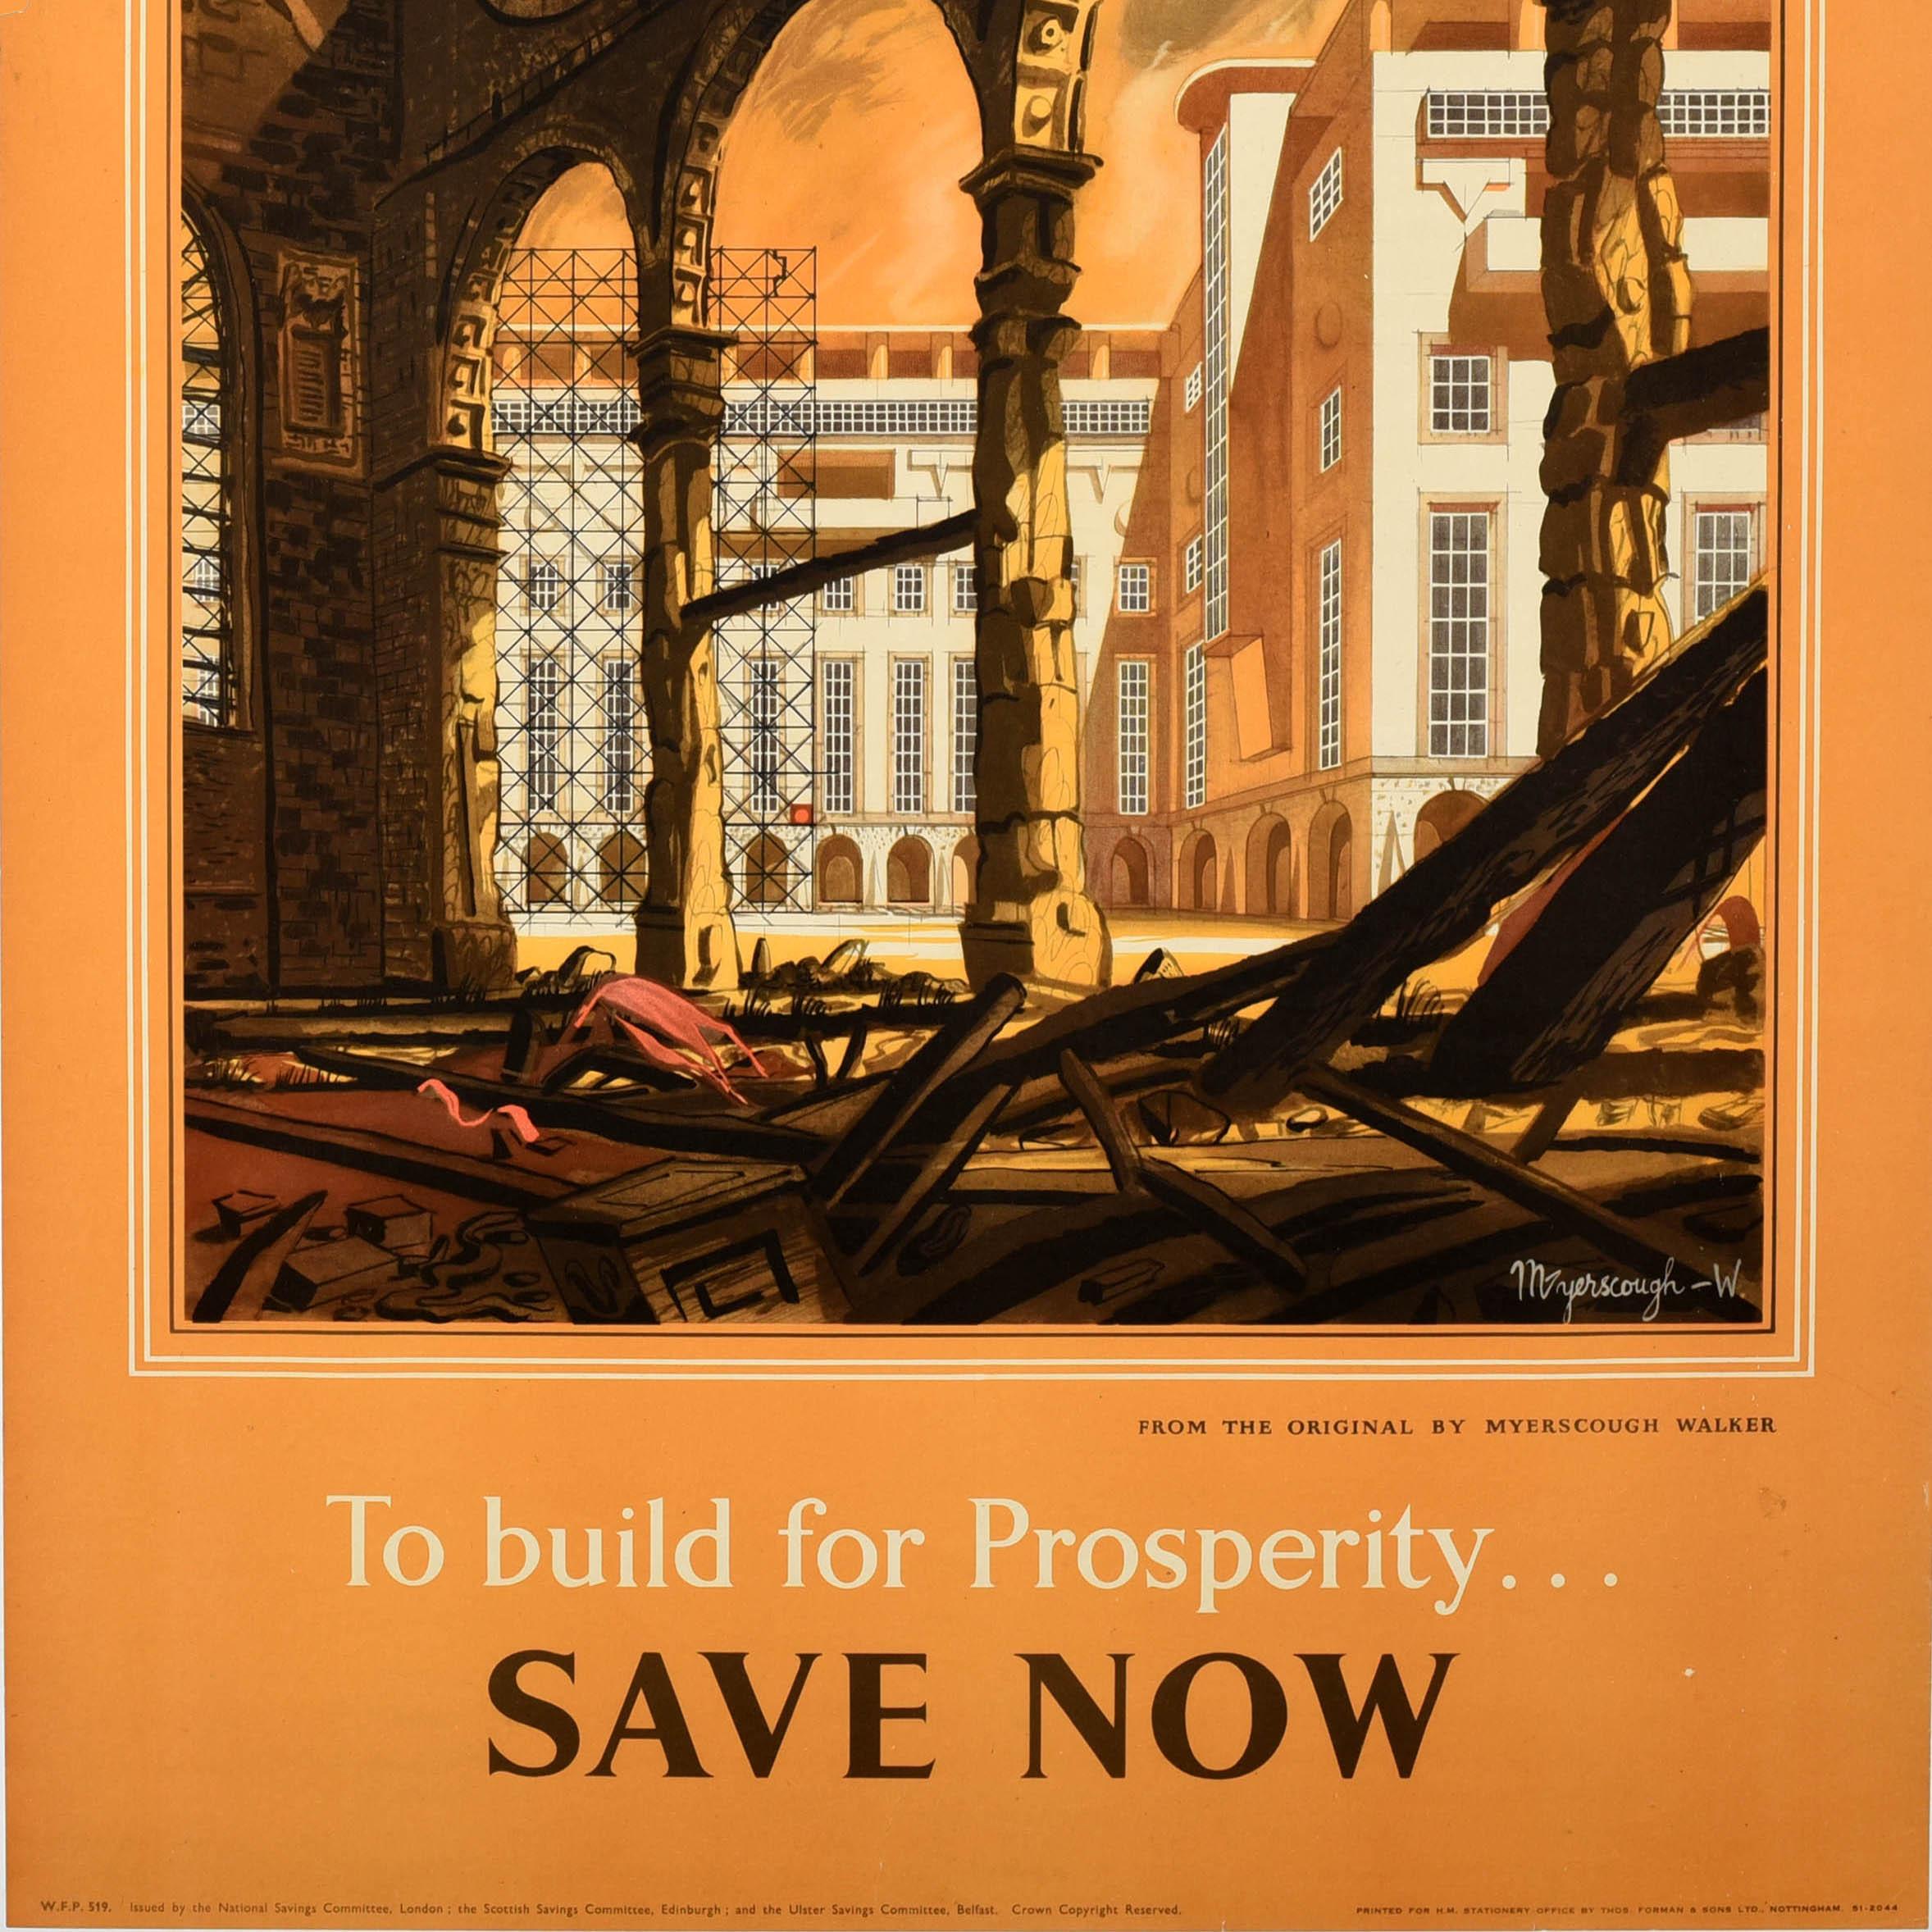 Original vintage World War Two poster - To Build for Prosperity ... Save Now - featuring an old church building in ruins with scaffolding and new buildings visible through the remaining pillars below a dramatic orange sky From an original by